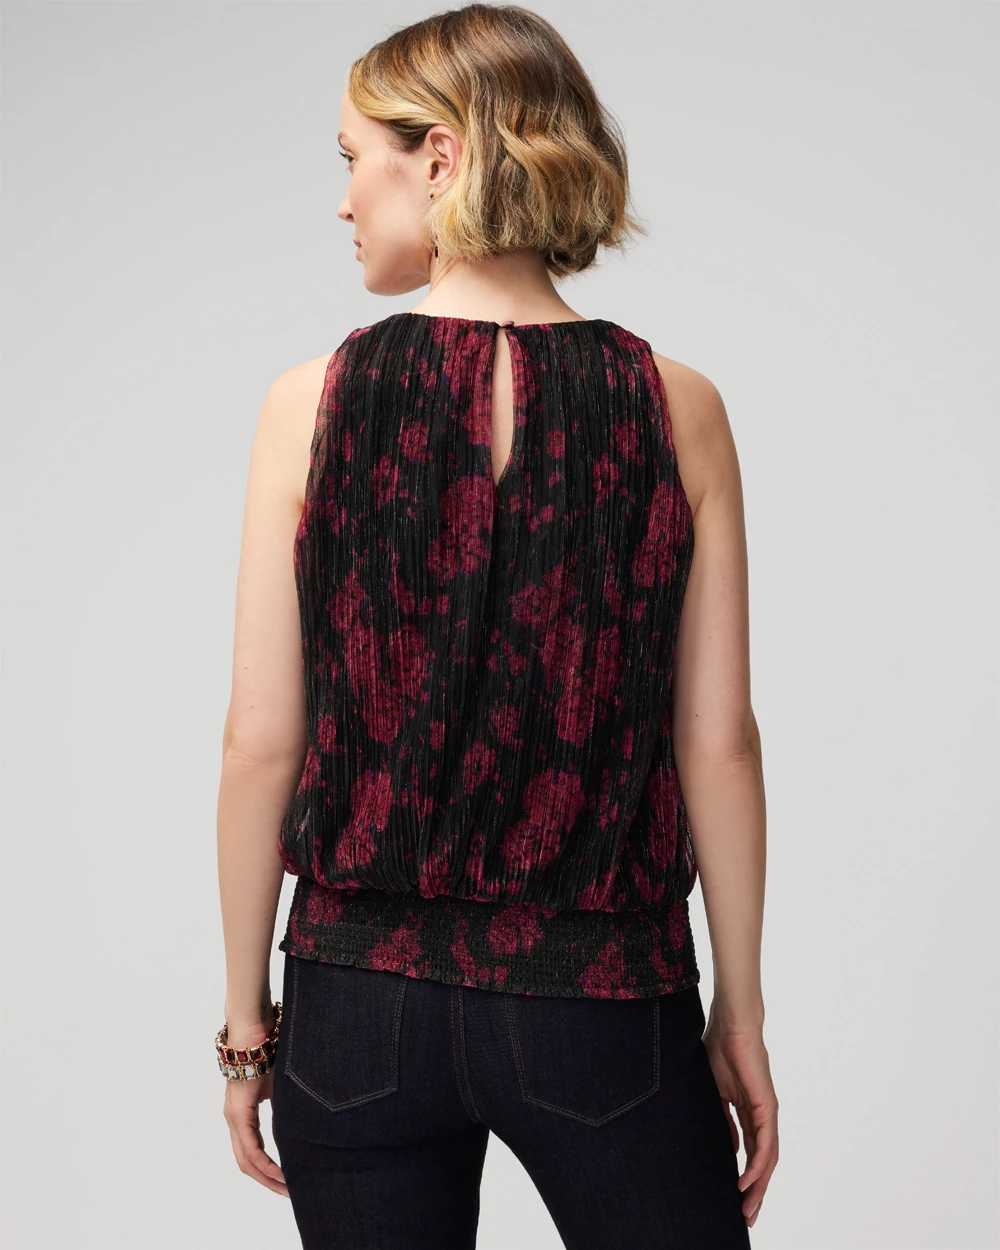 Printed Sleeveless Top click to view larger image.